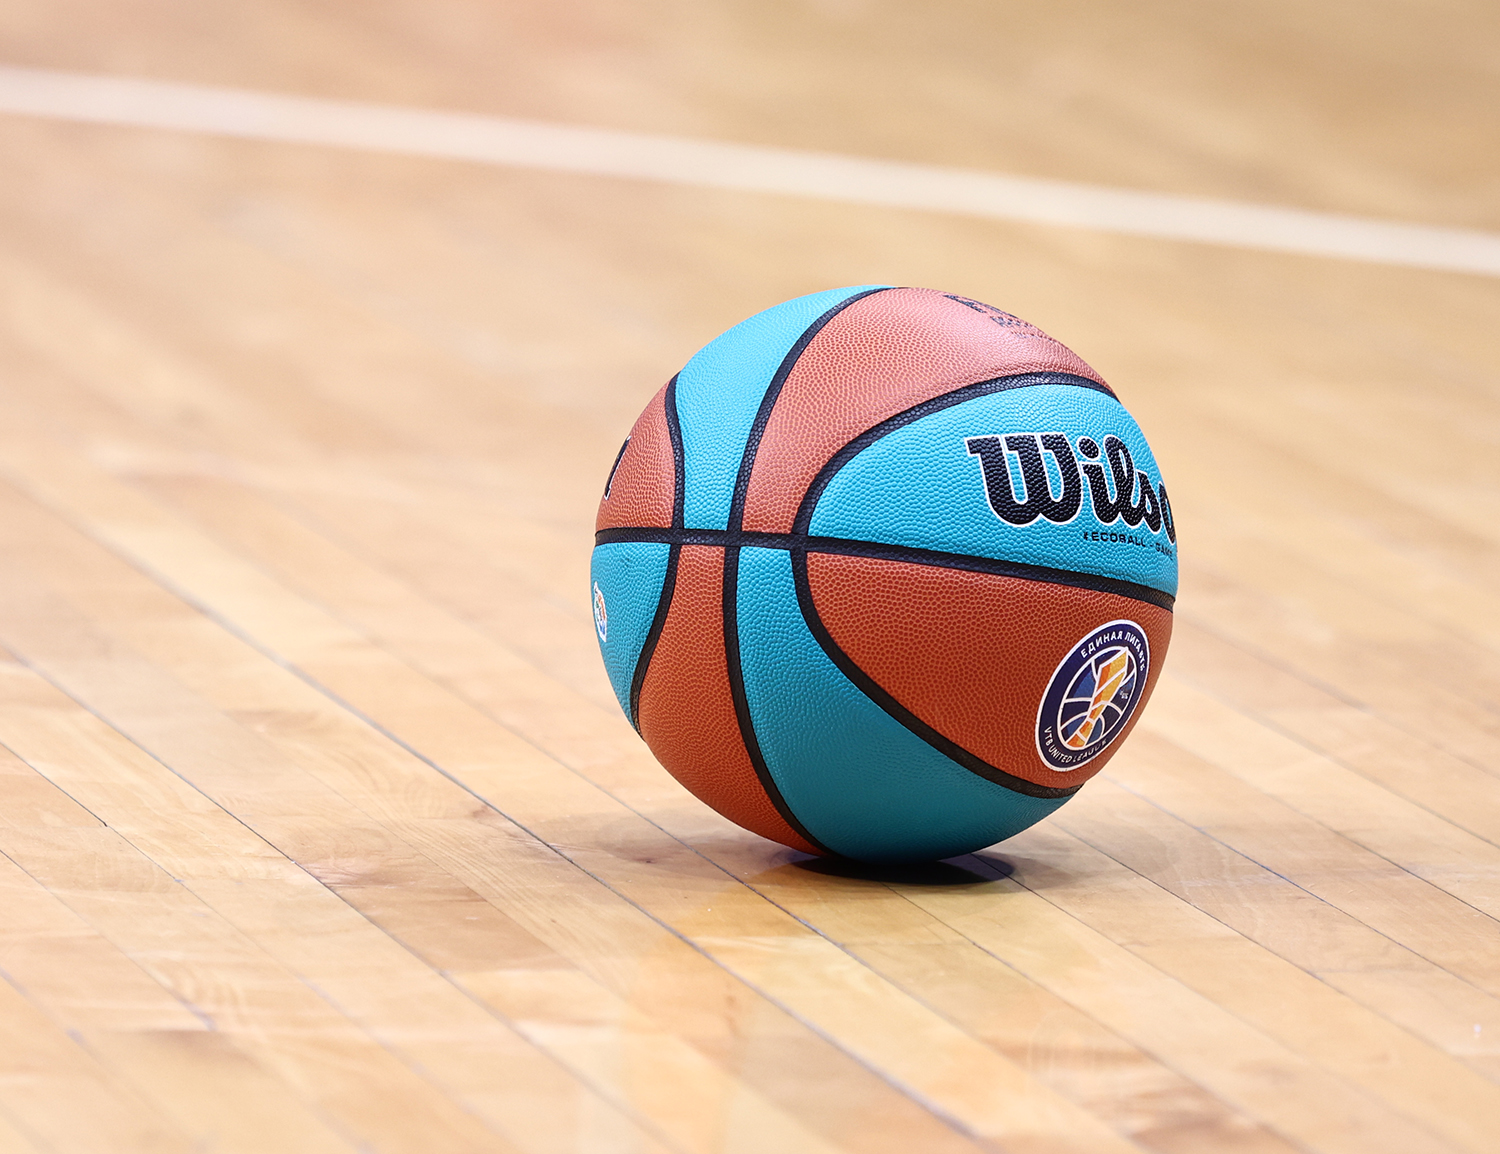 VTB United League has no plans to suspend the season due to COVID-19